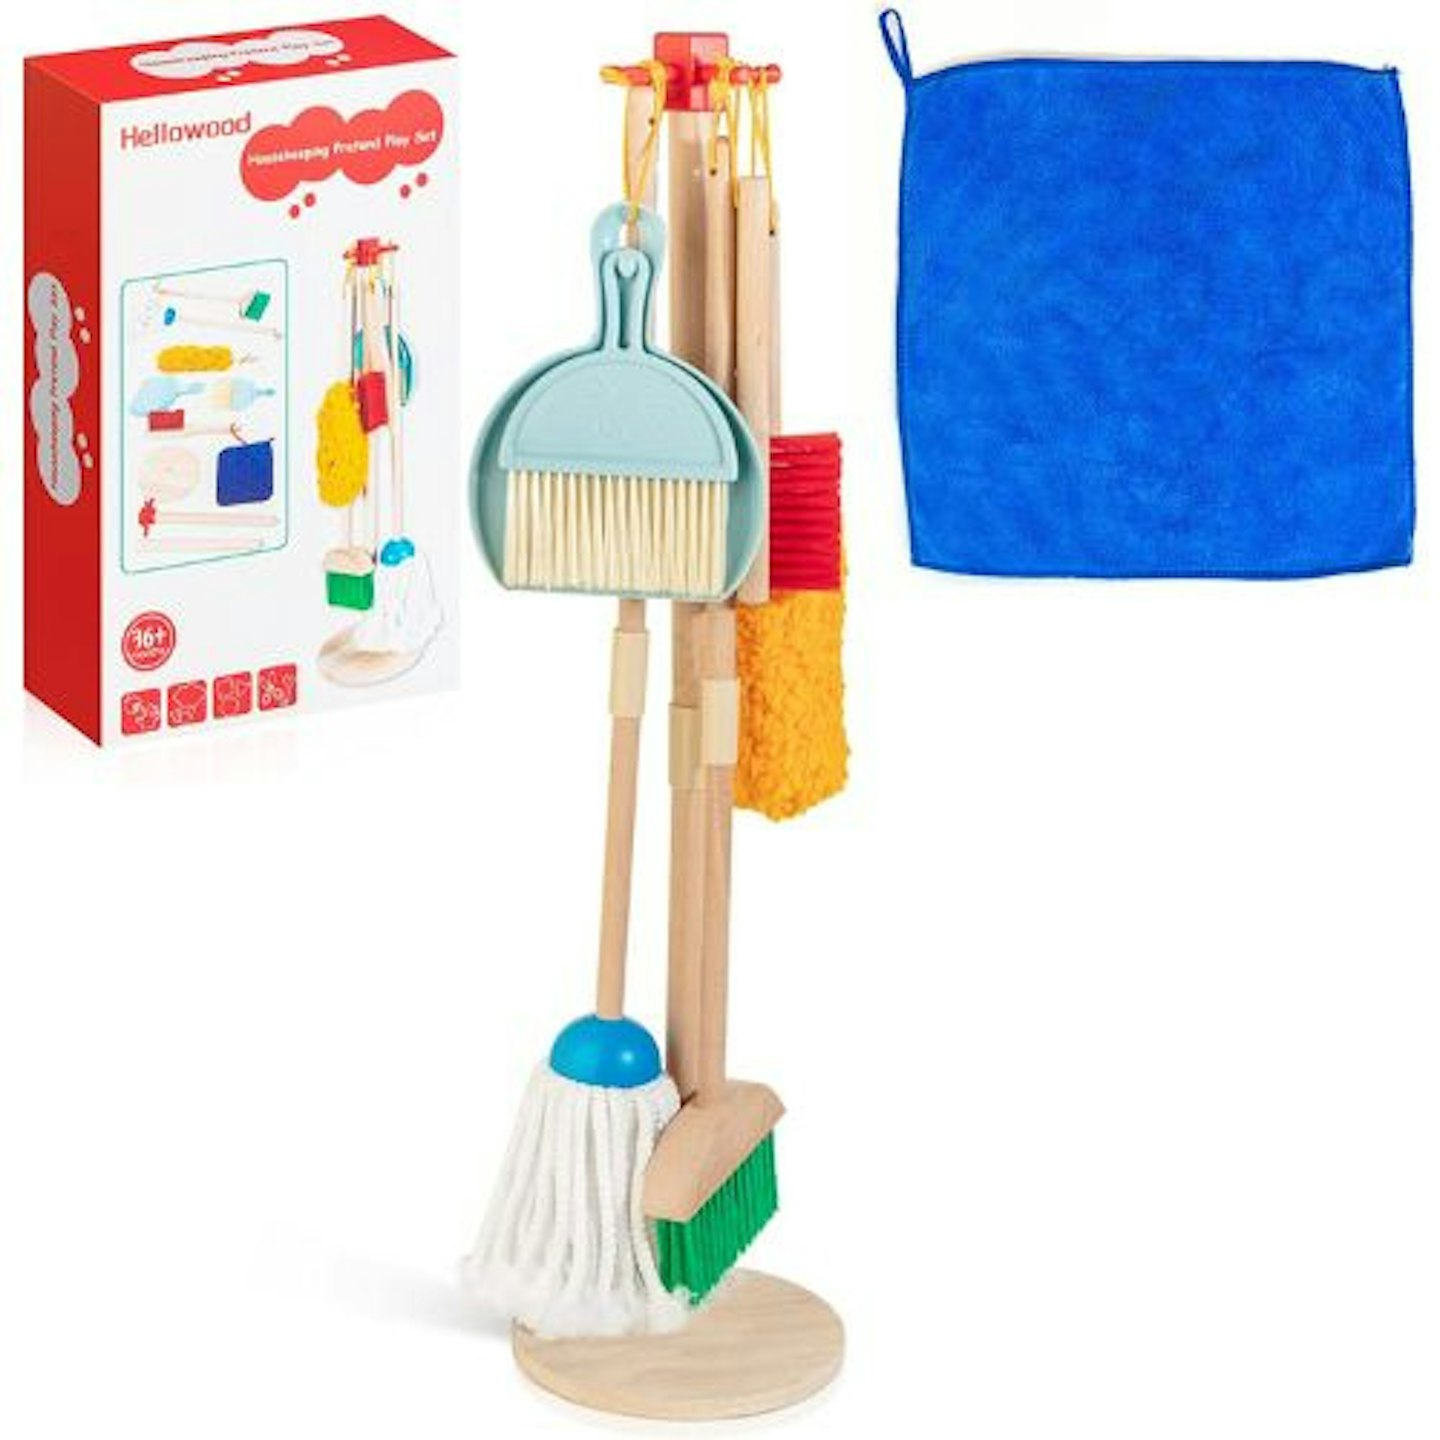 Best Children's Toys : HELLOWOOD Kids Cleaning Set